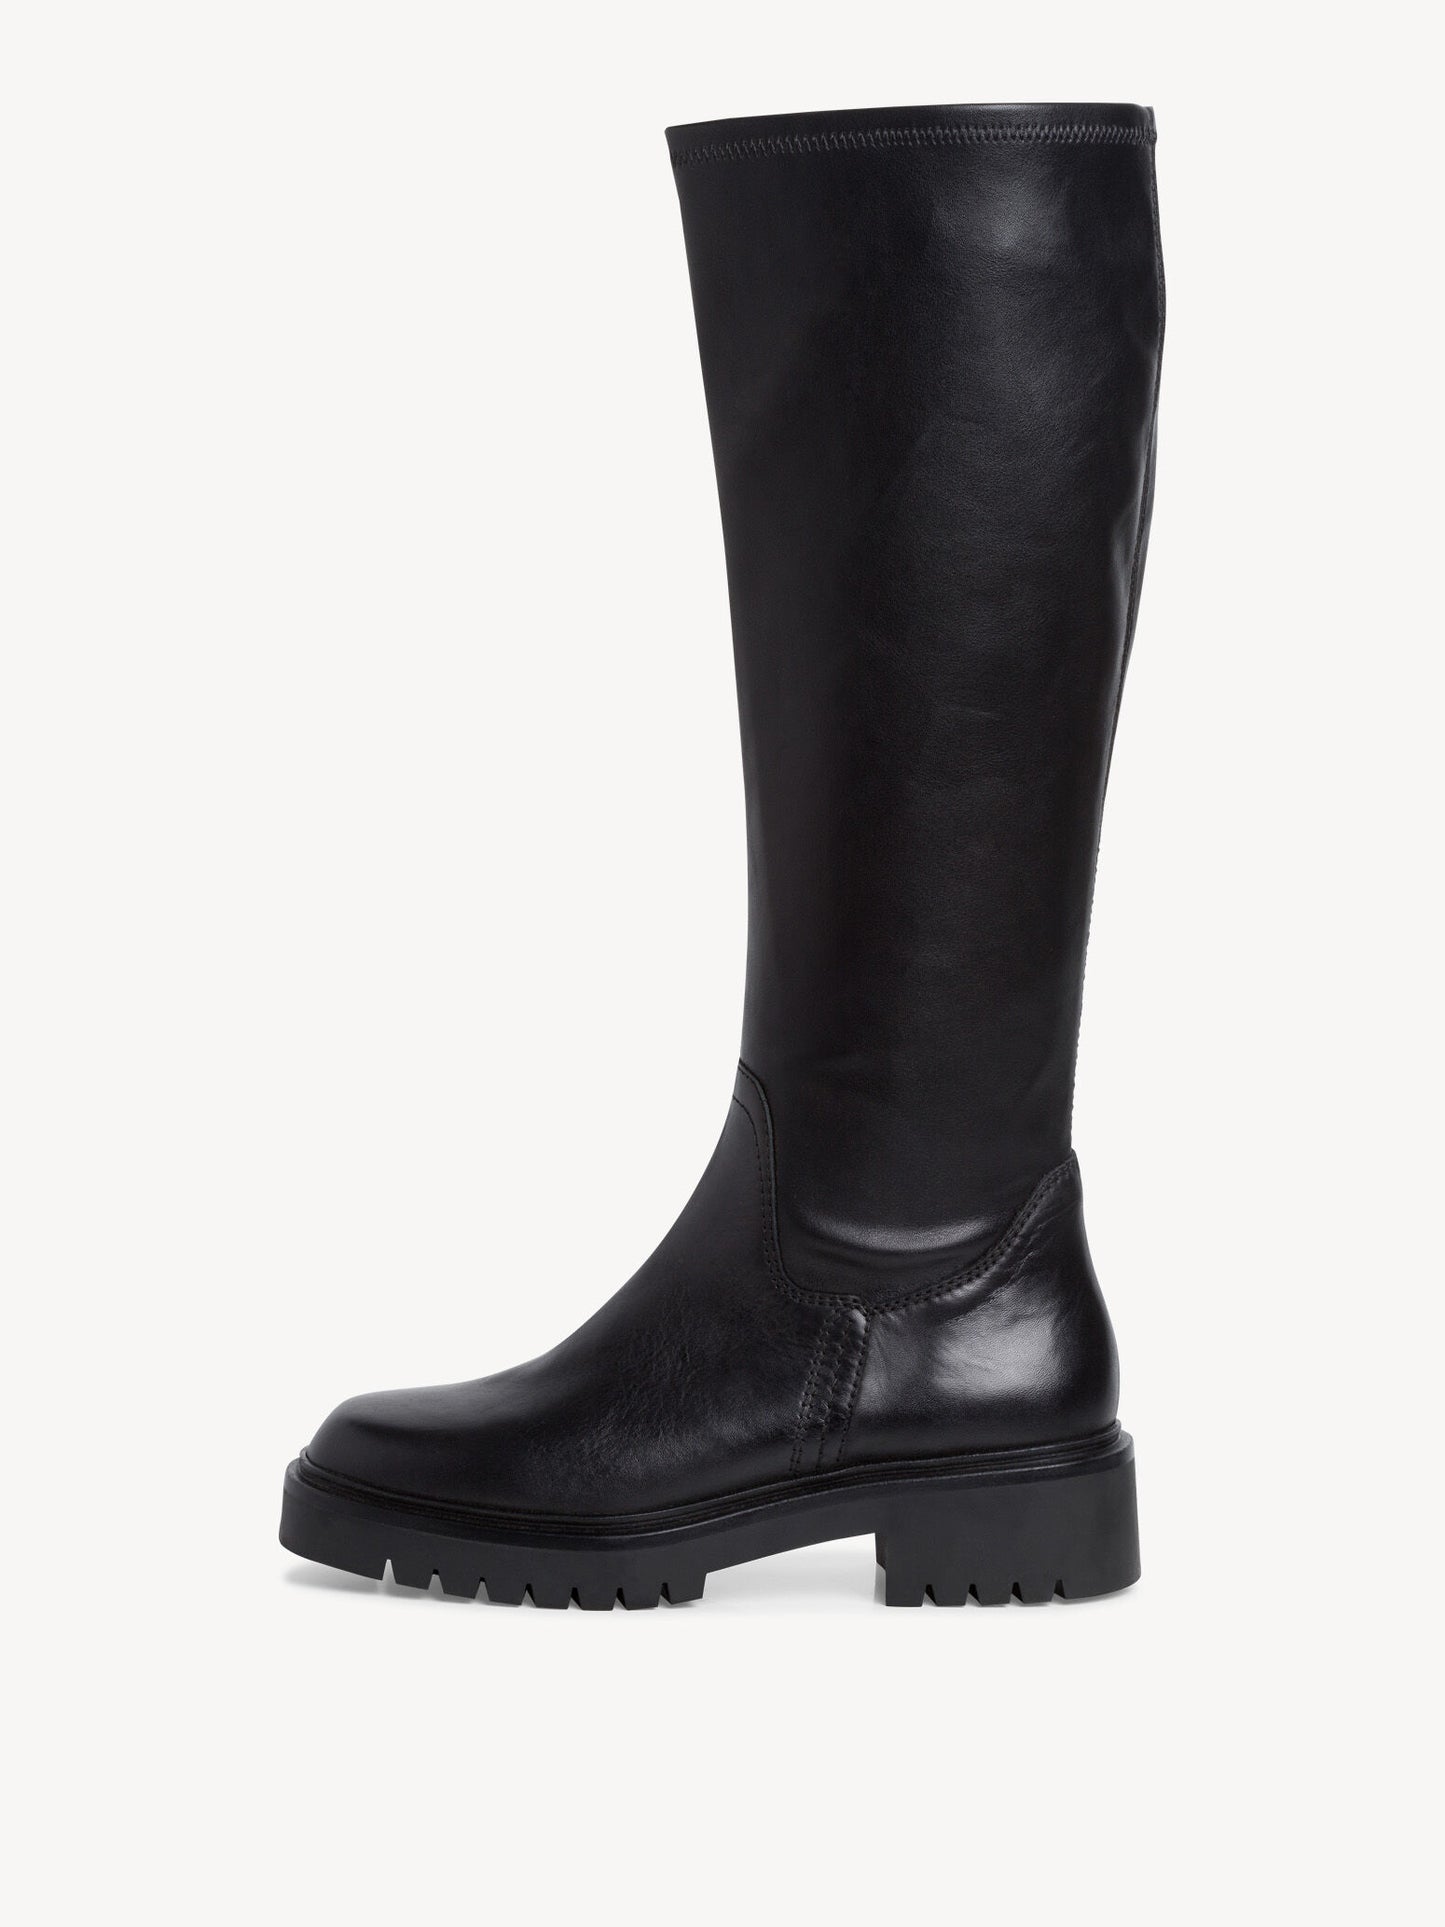 Leather Tall Chunky Boot - Black